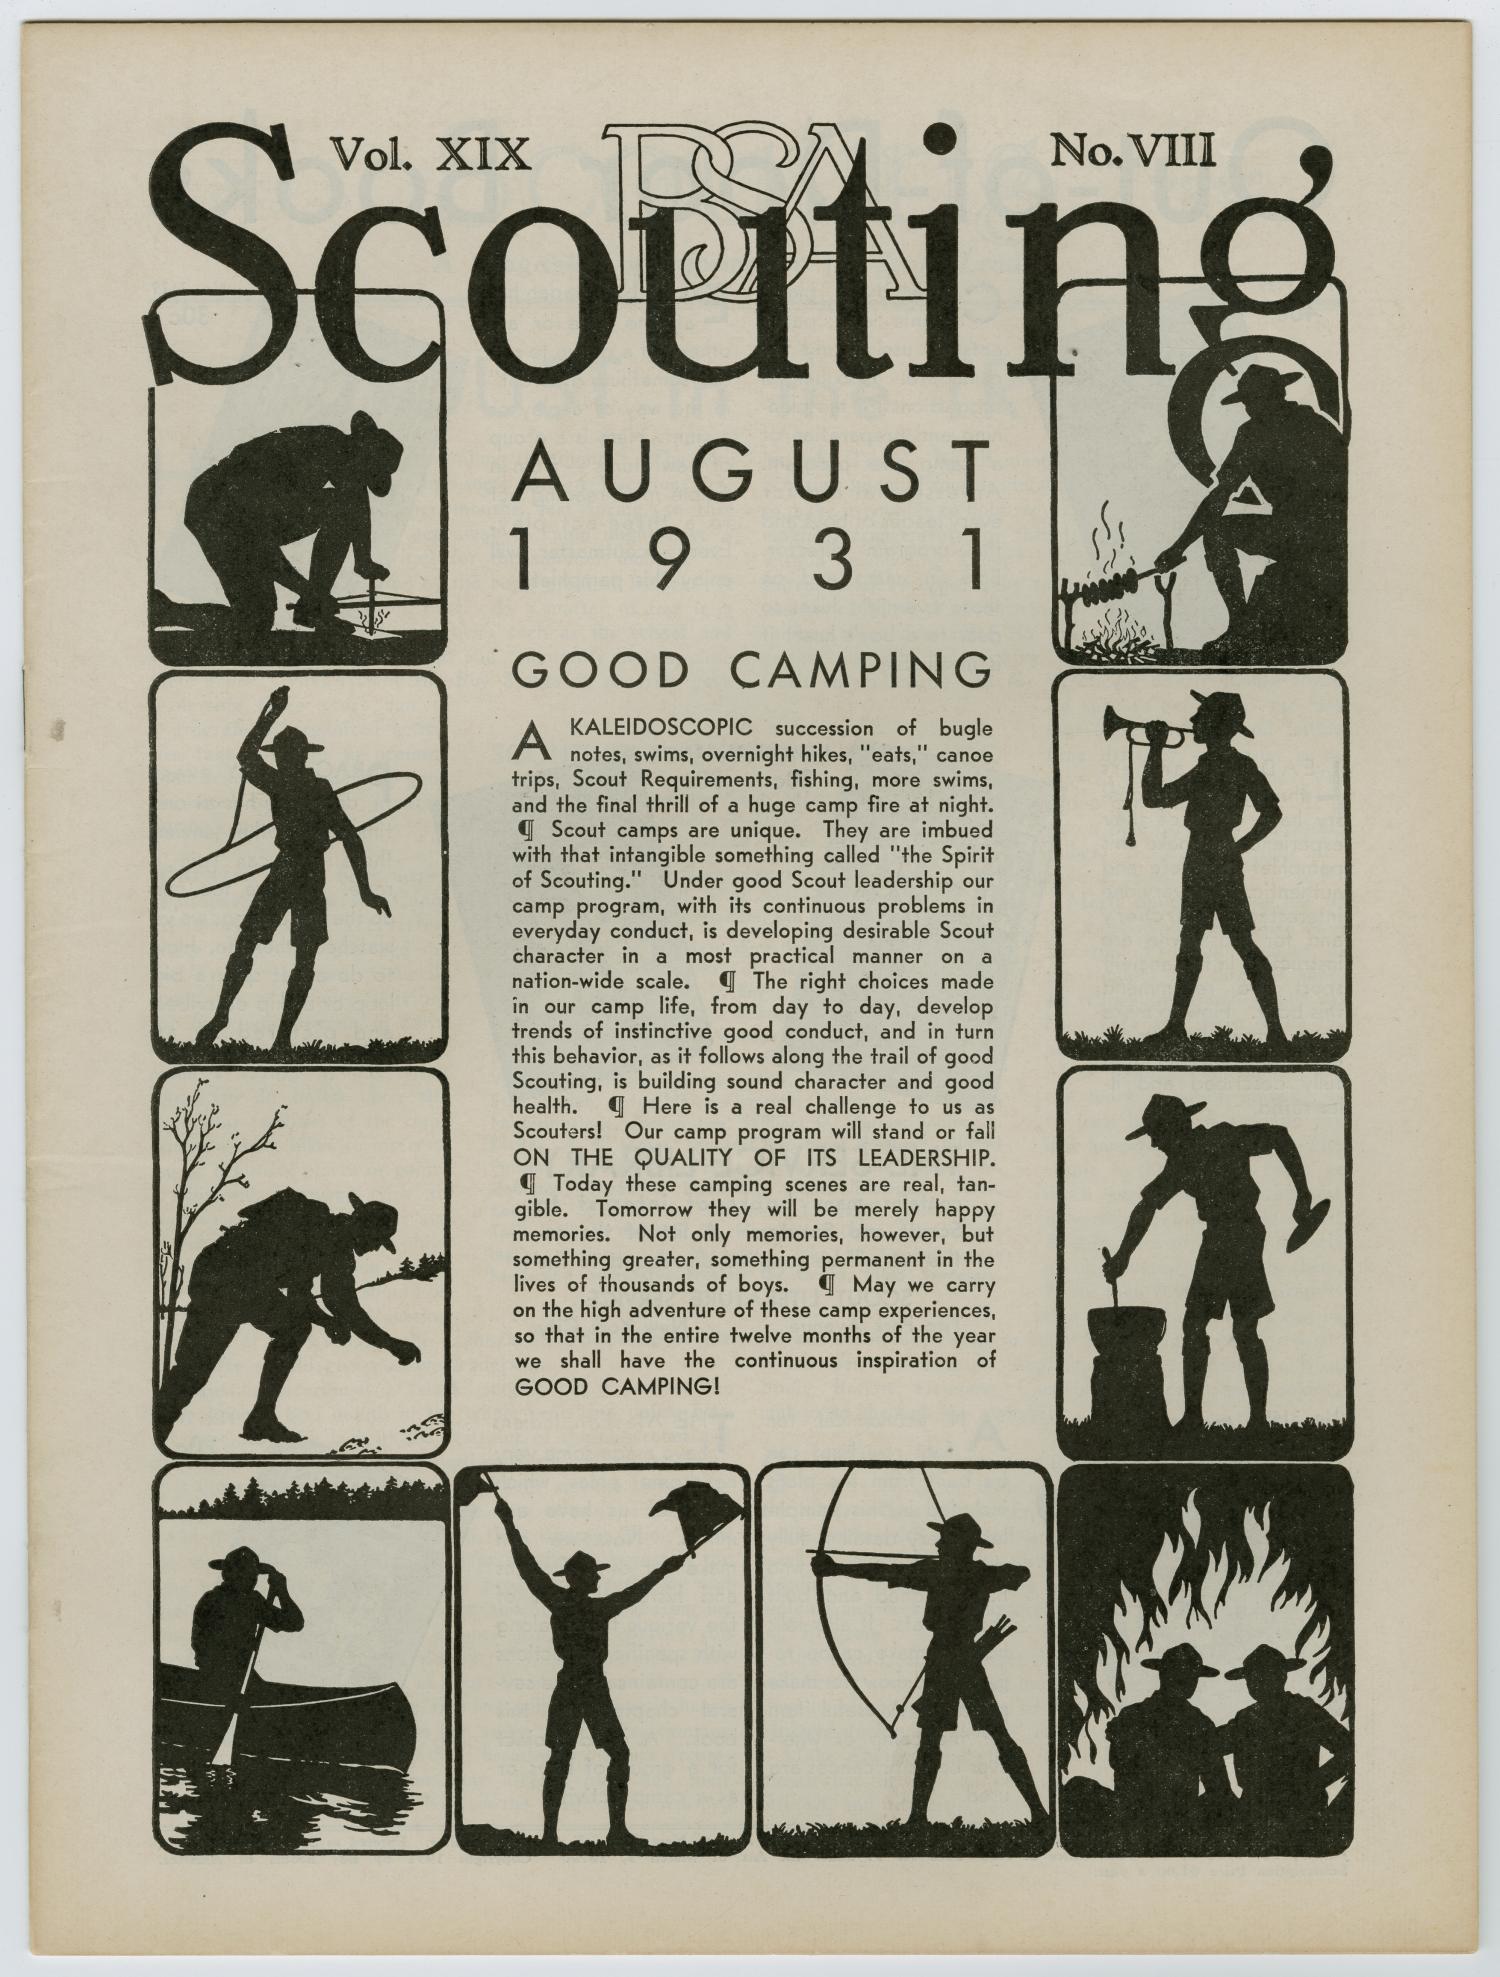 Scouting, Volume 19, Number 8, August 1931
                                                
                                                    1
                                                